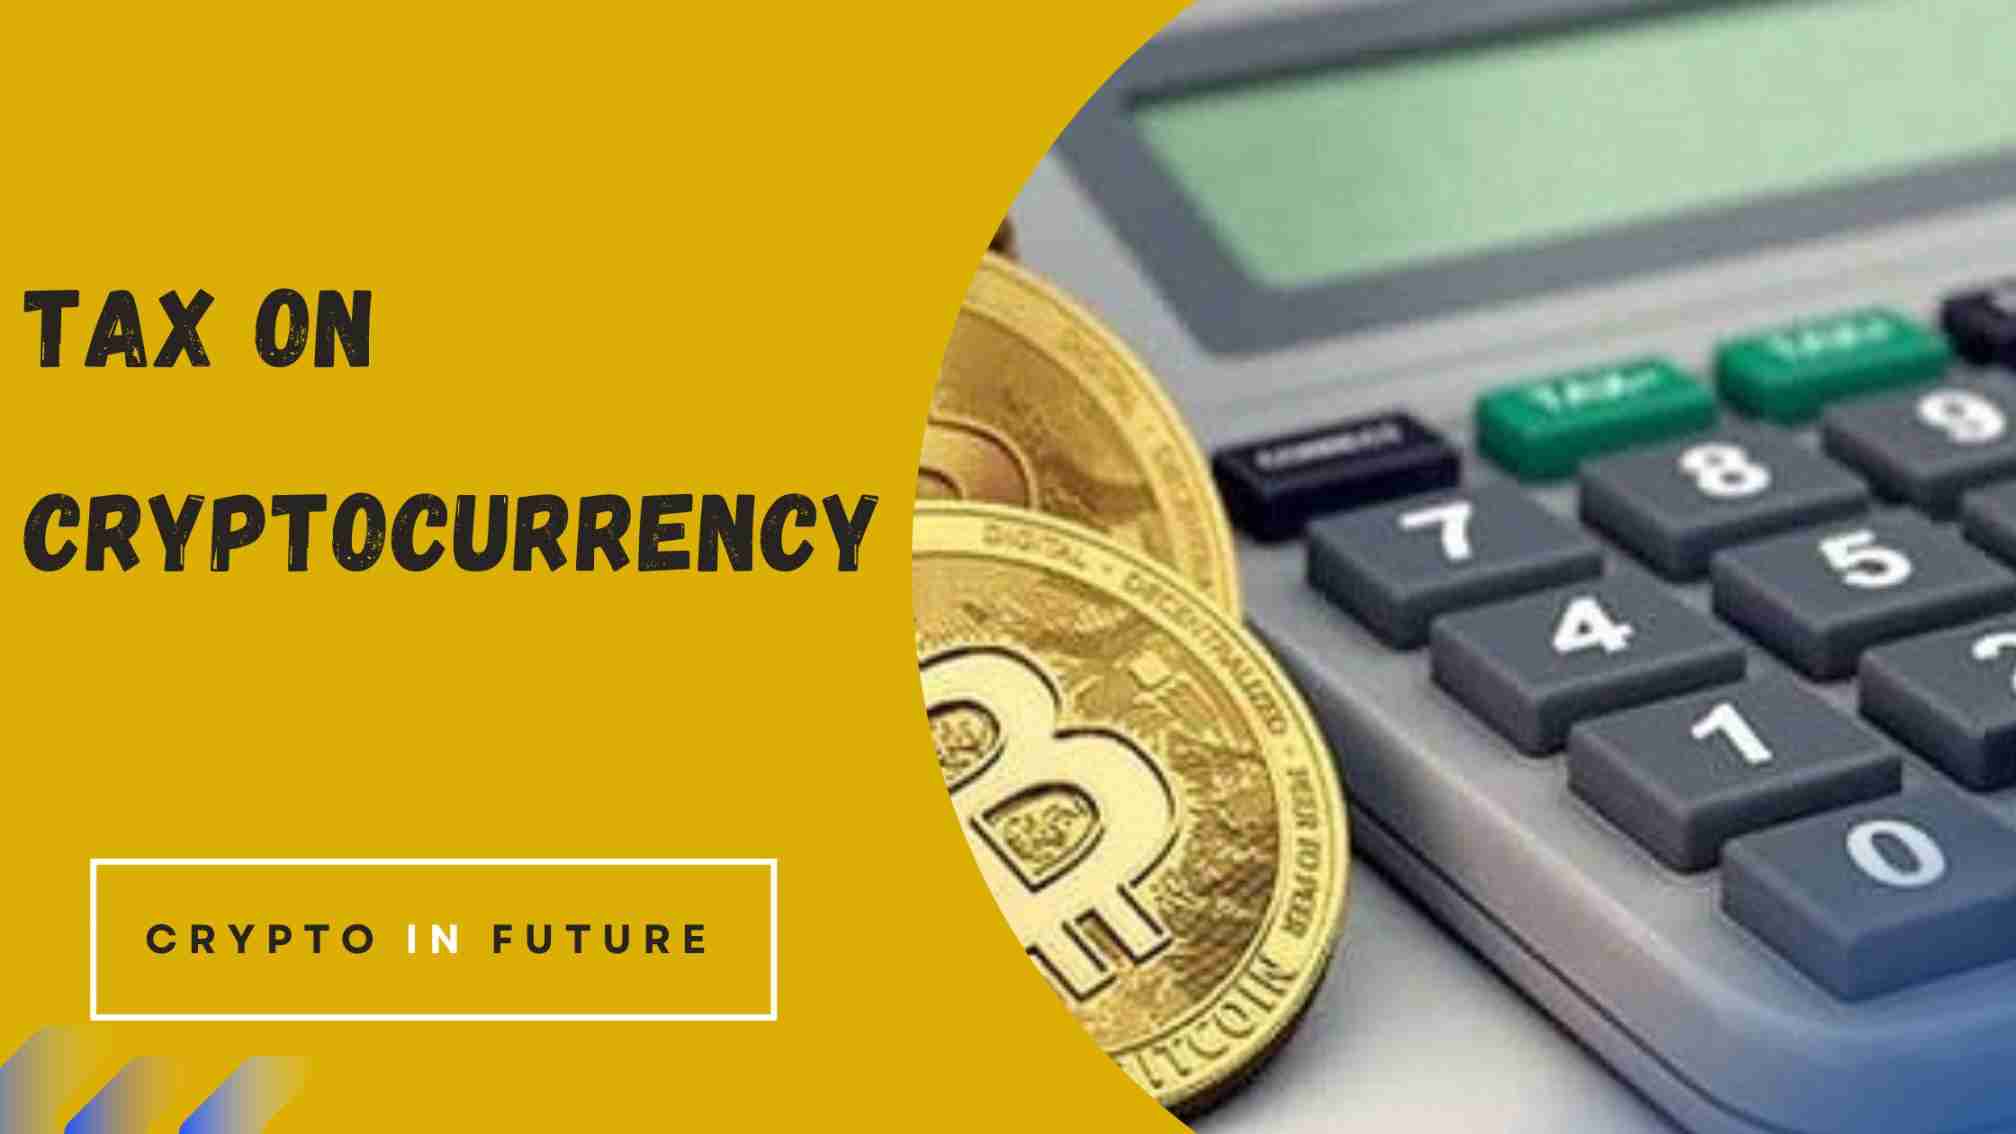 Tax on Cryptocurrency- Know The India Govt's Tax Rules on Crypto in Future